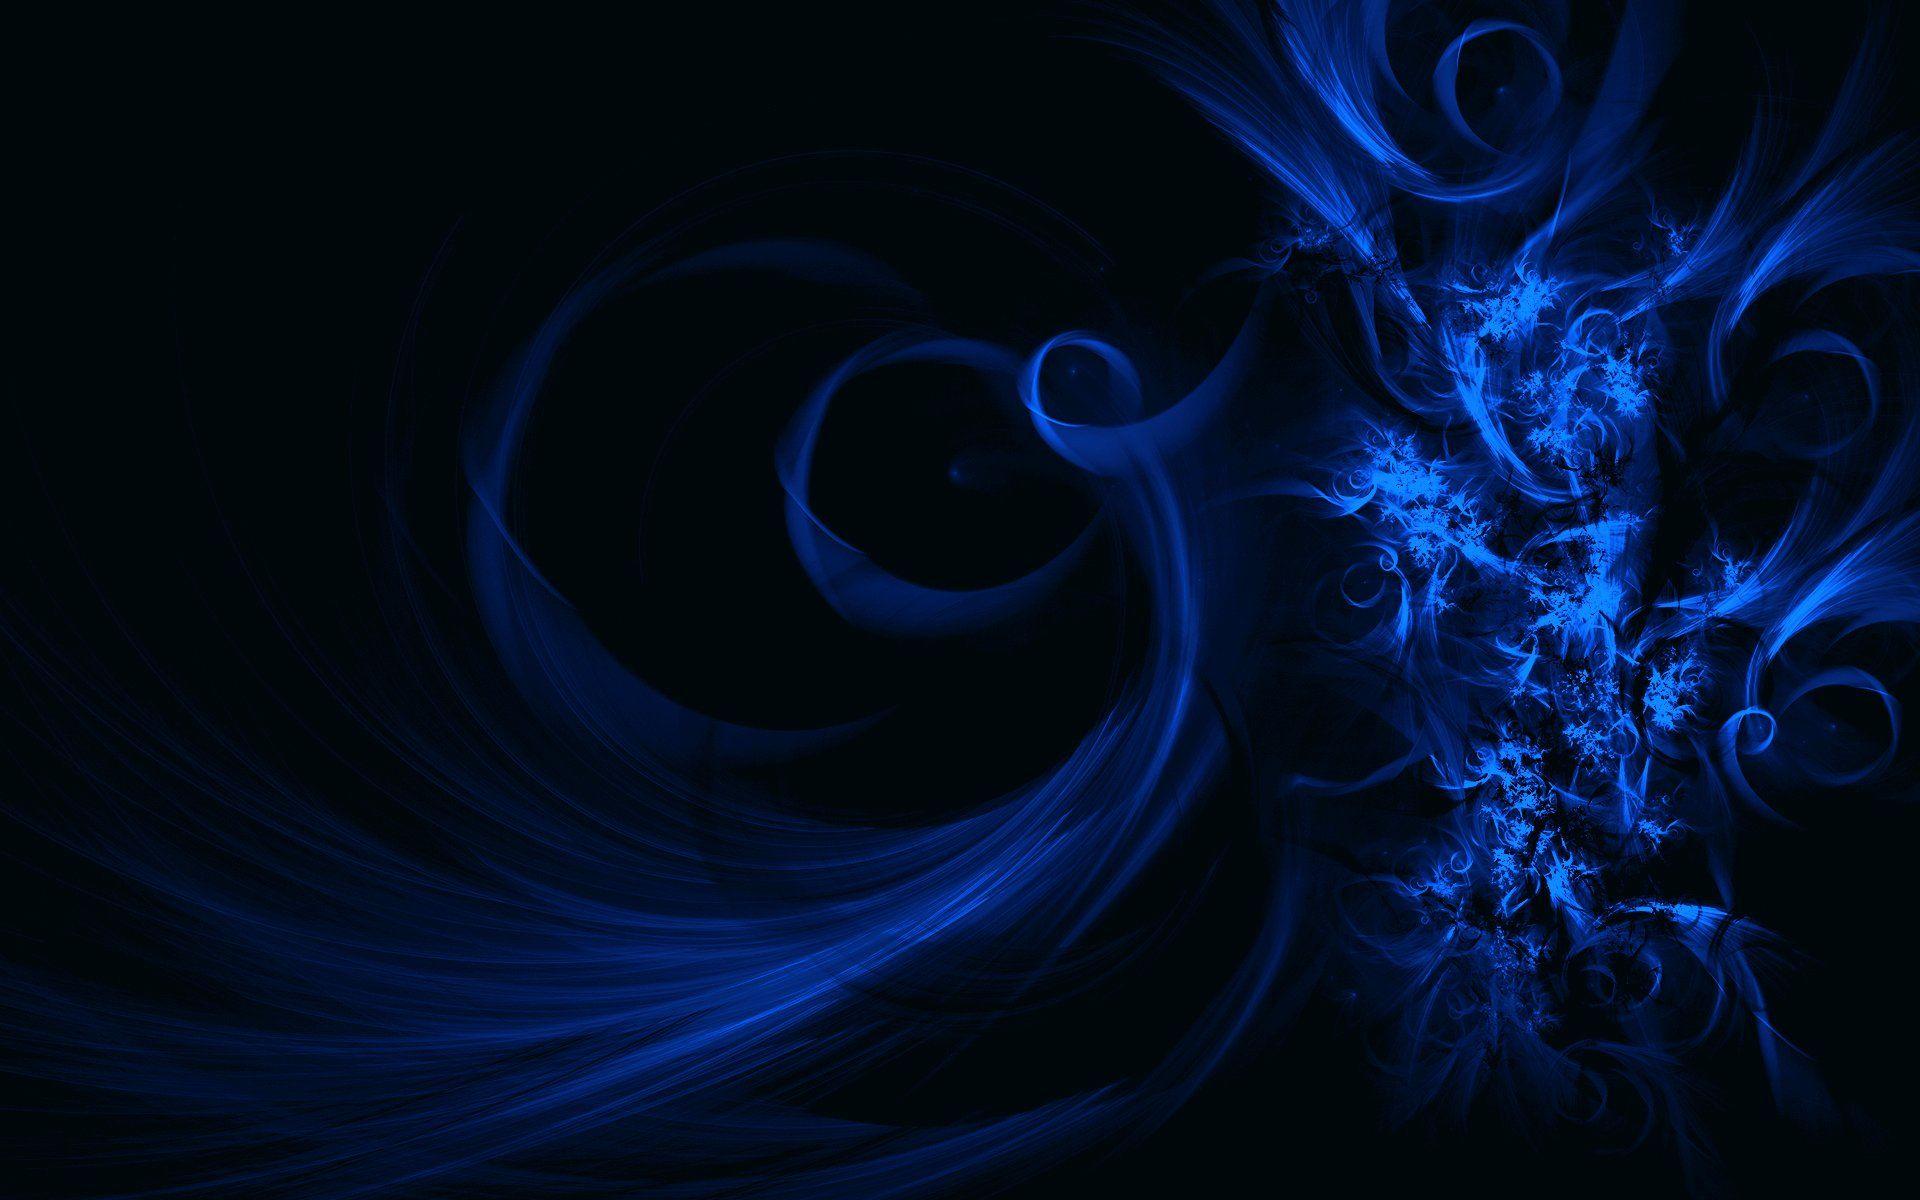 Black And Blue Wallpapers Hd - Wallpaper Cave